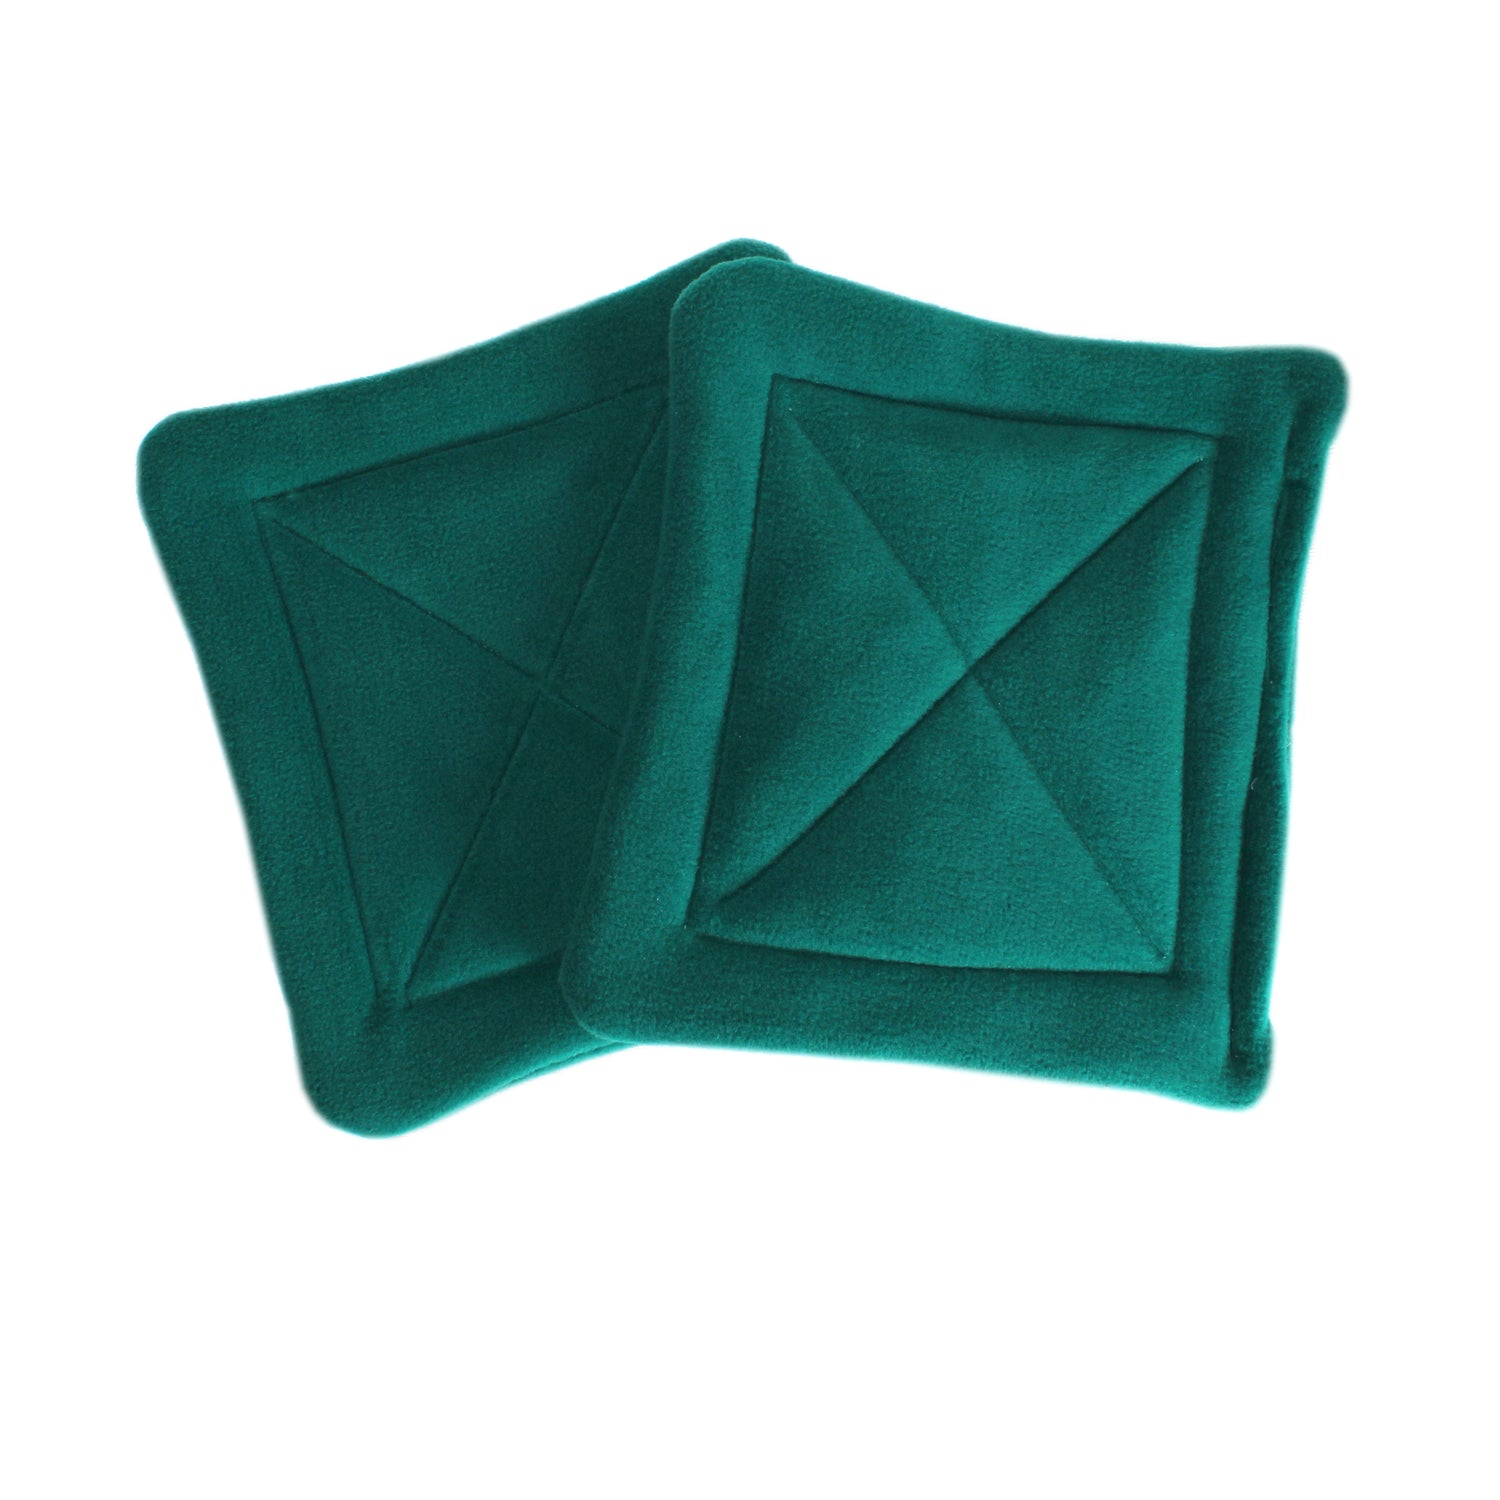 Square Pee Pads for Guinea Pig Hidey Houses